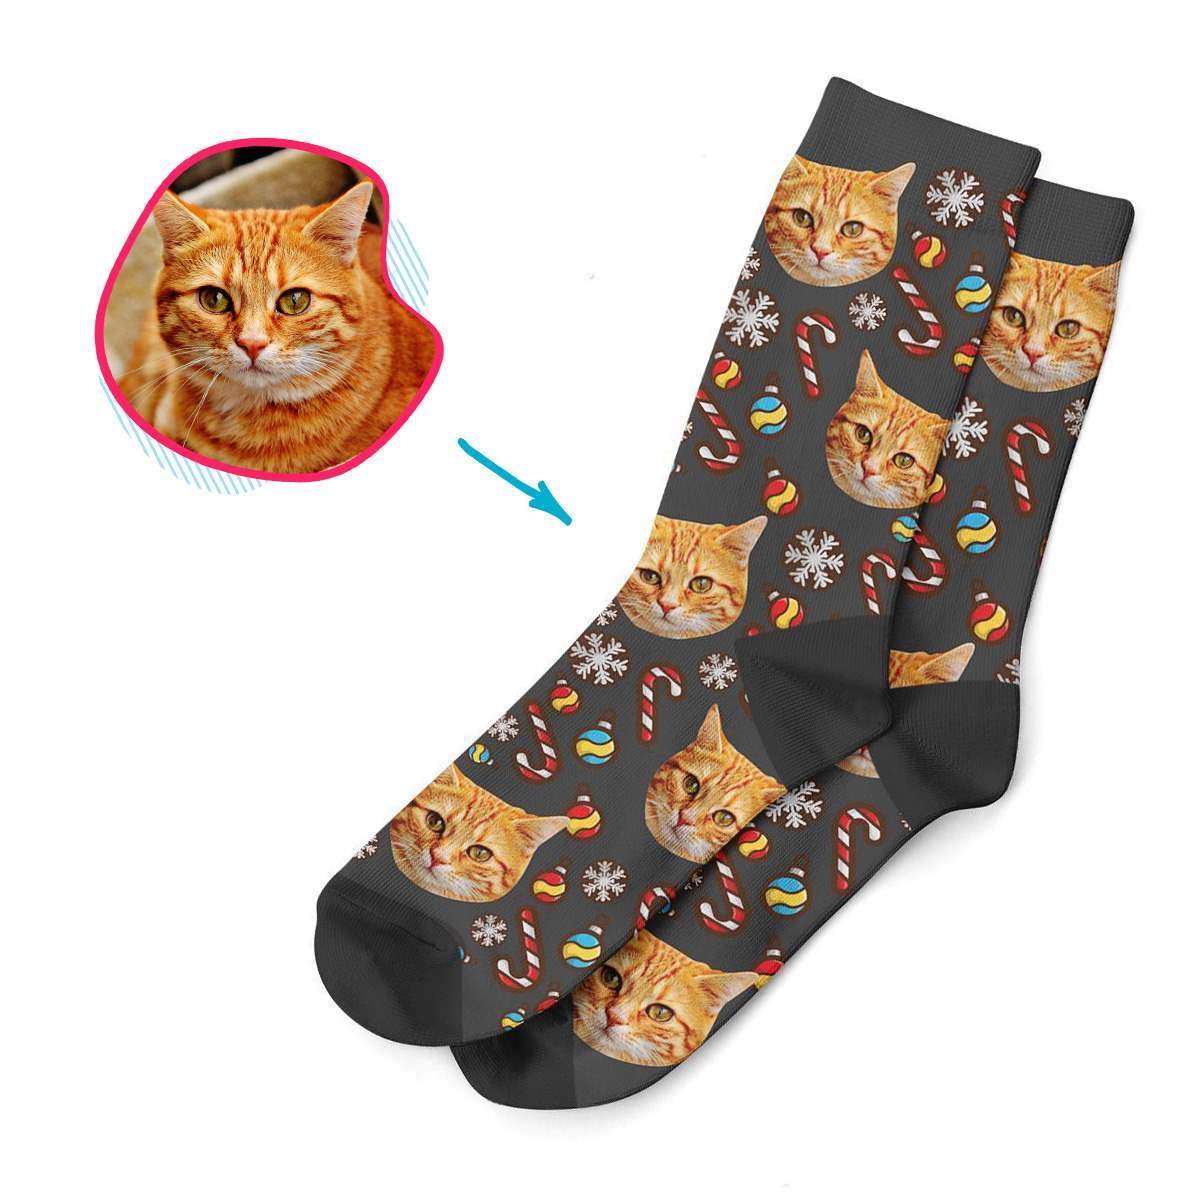 dark Christmas Tree Toy socks personalized with photo of face printed on them